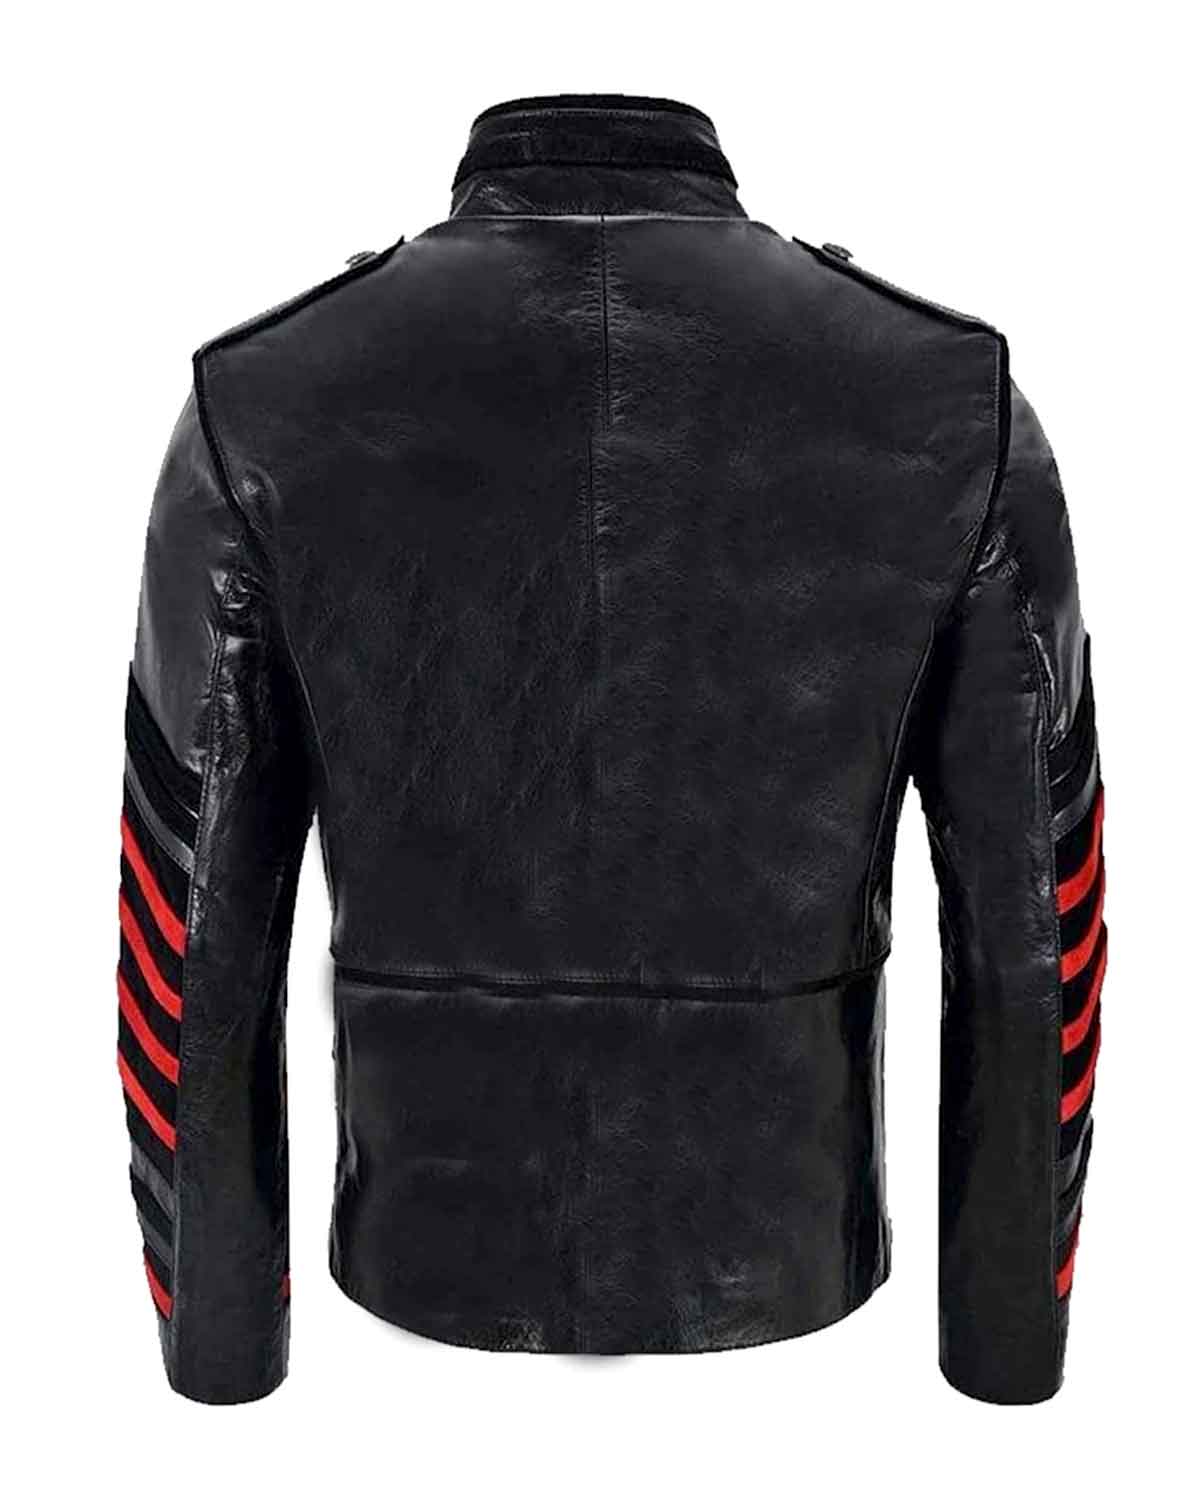 MotorCycleJackets Men's Black Military Style Real Leather Jacket